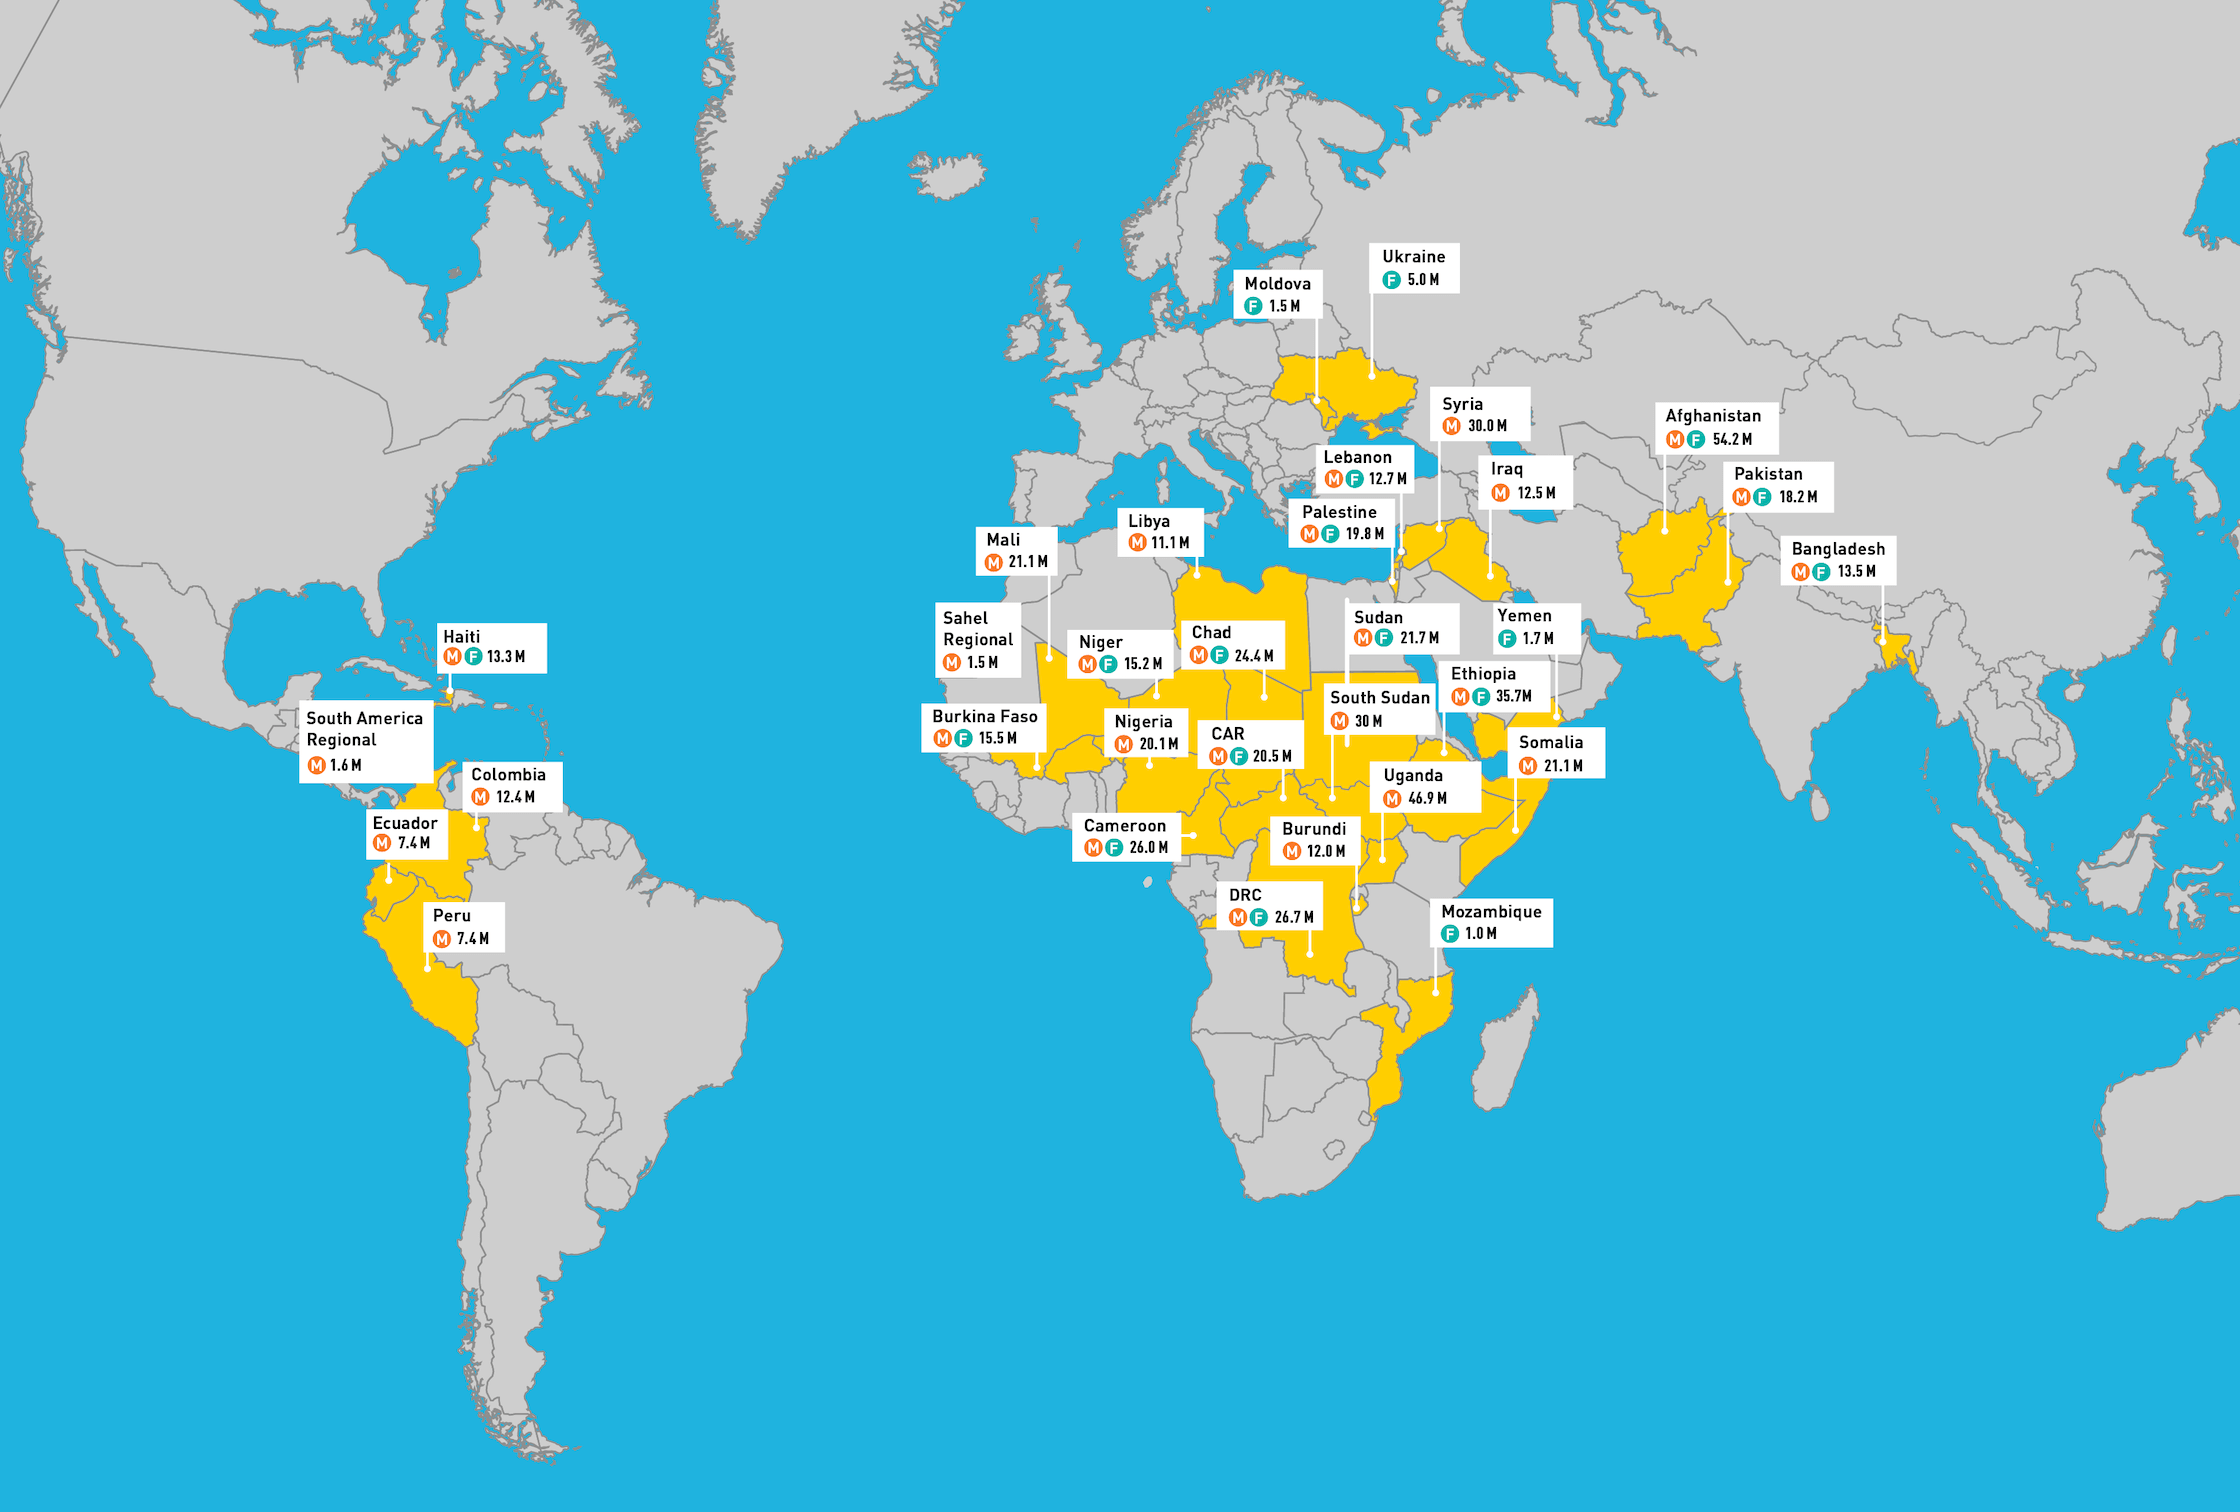 world map of active grants, located in south america, africa, asia, and europe